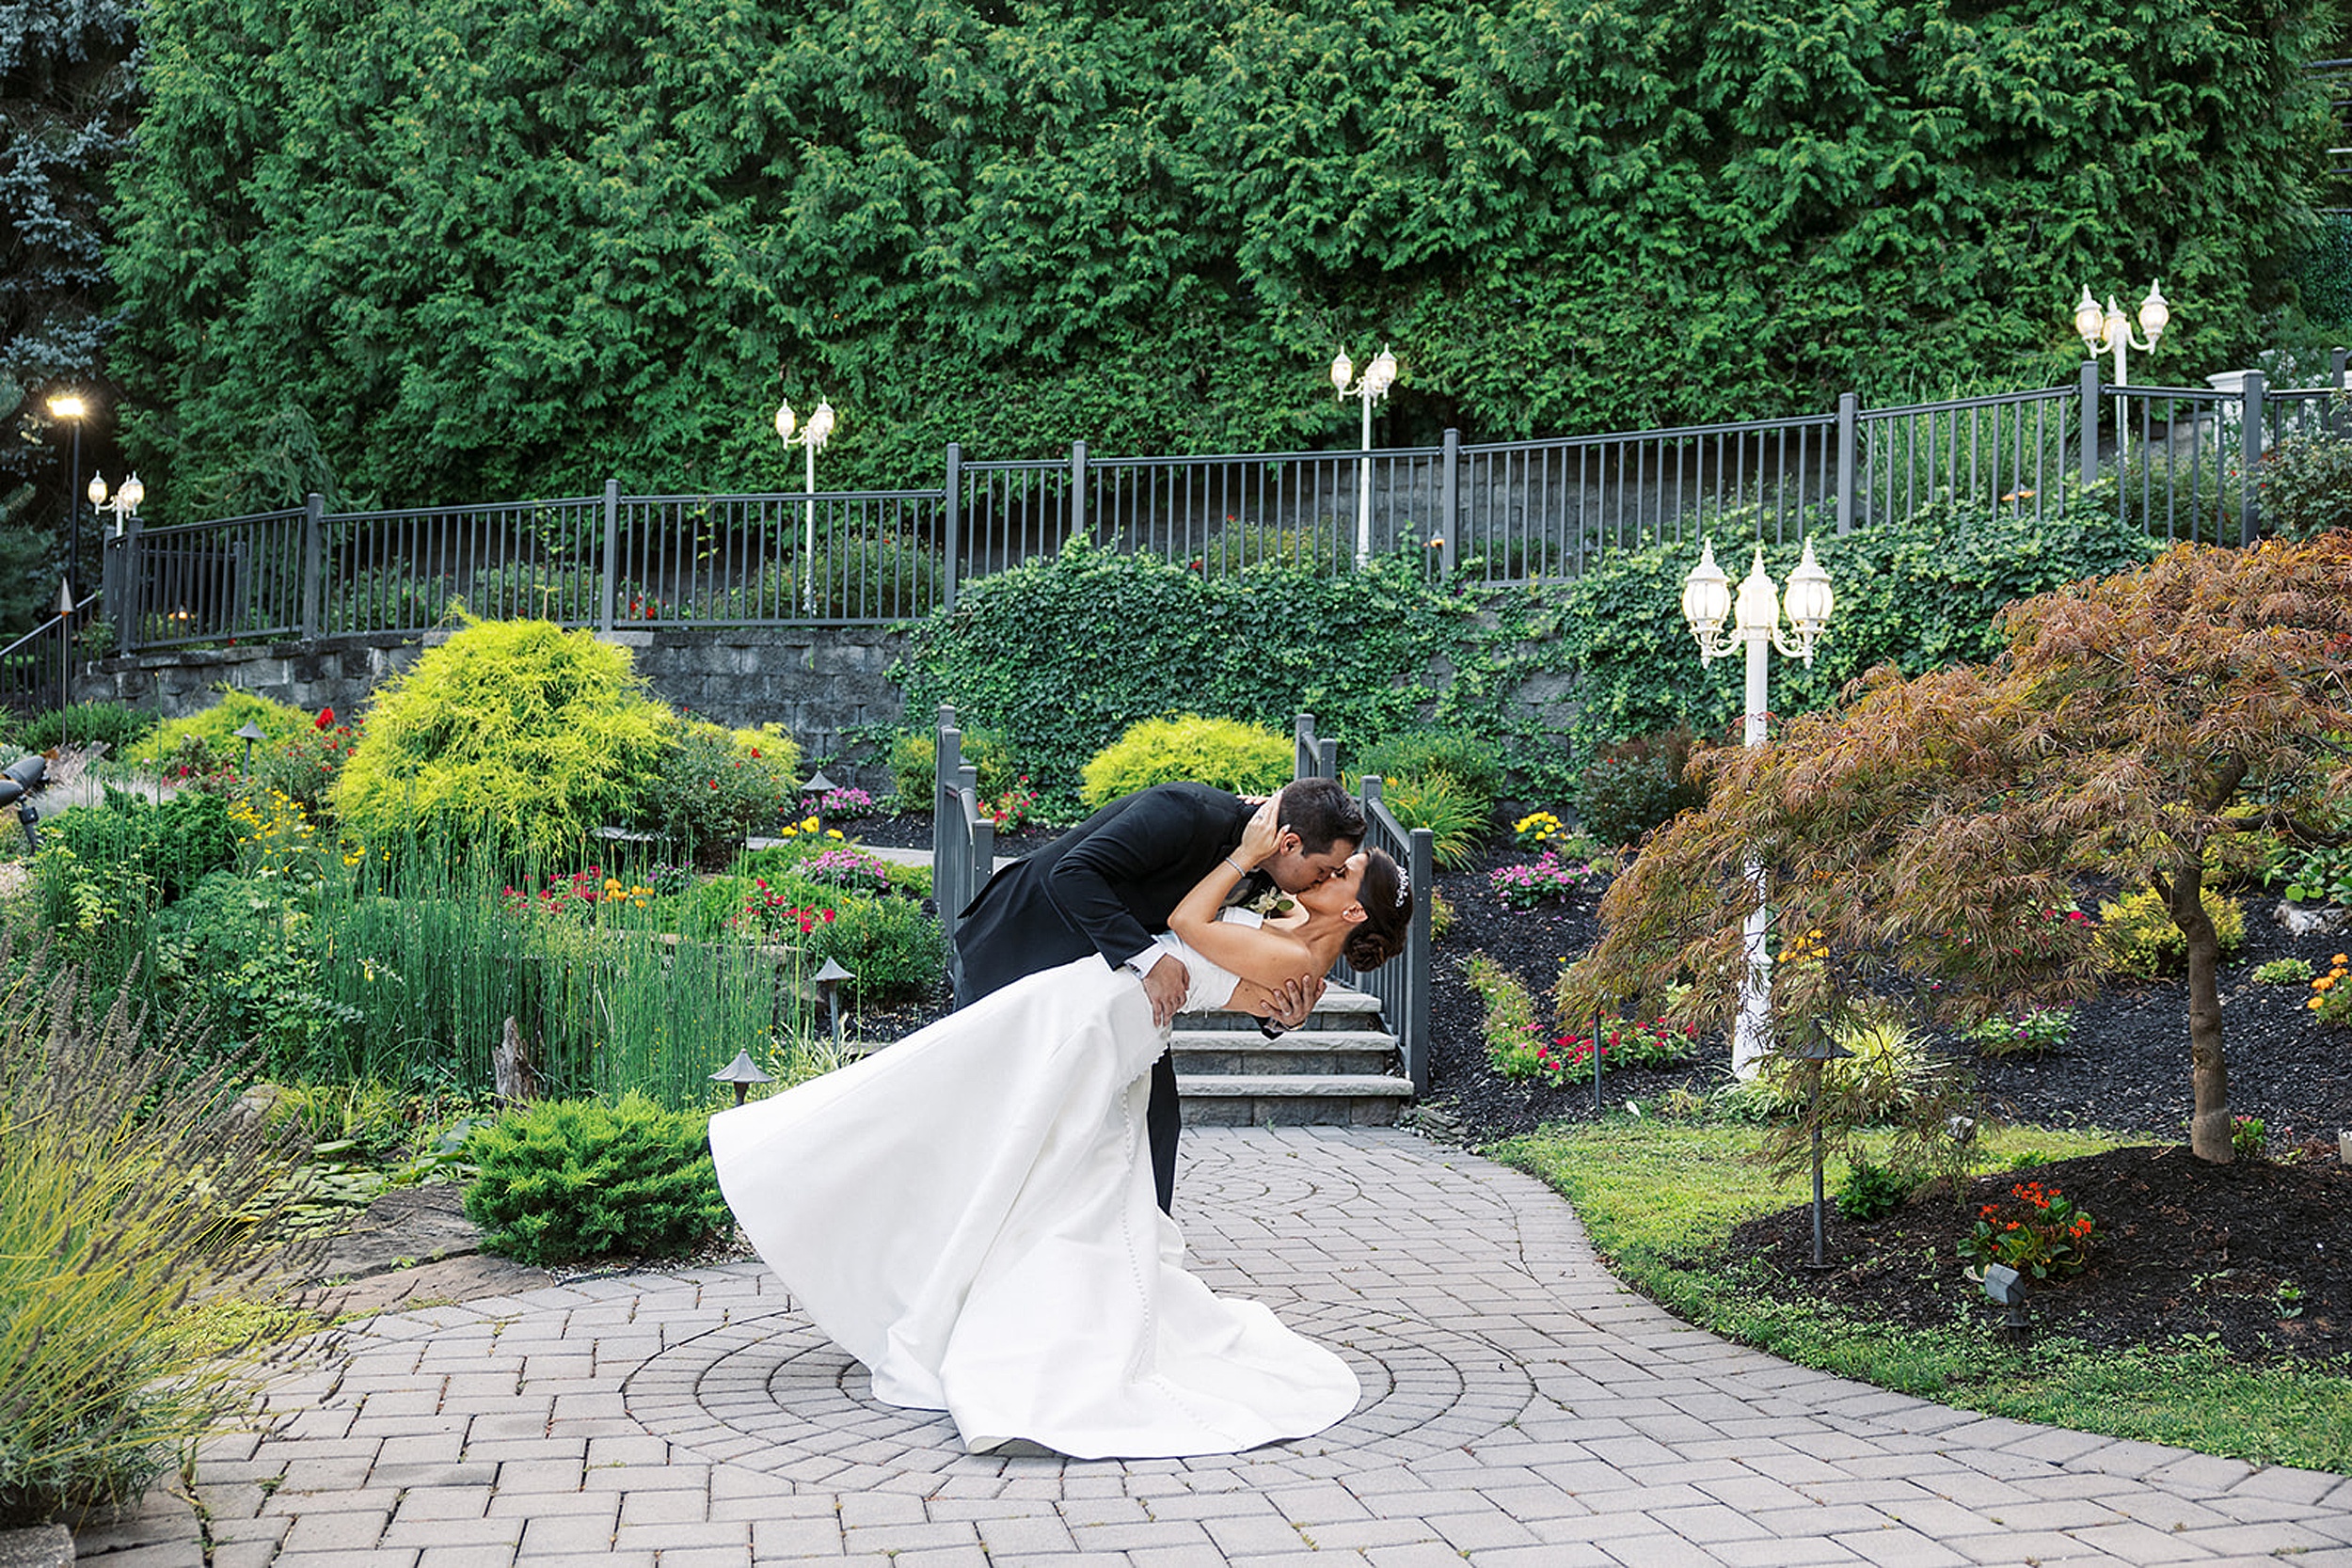 A groom dips and kisses his bride in a garden path at a valley regency wedding